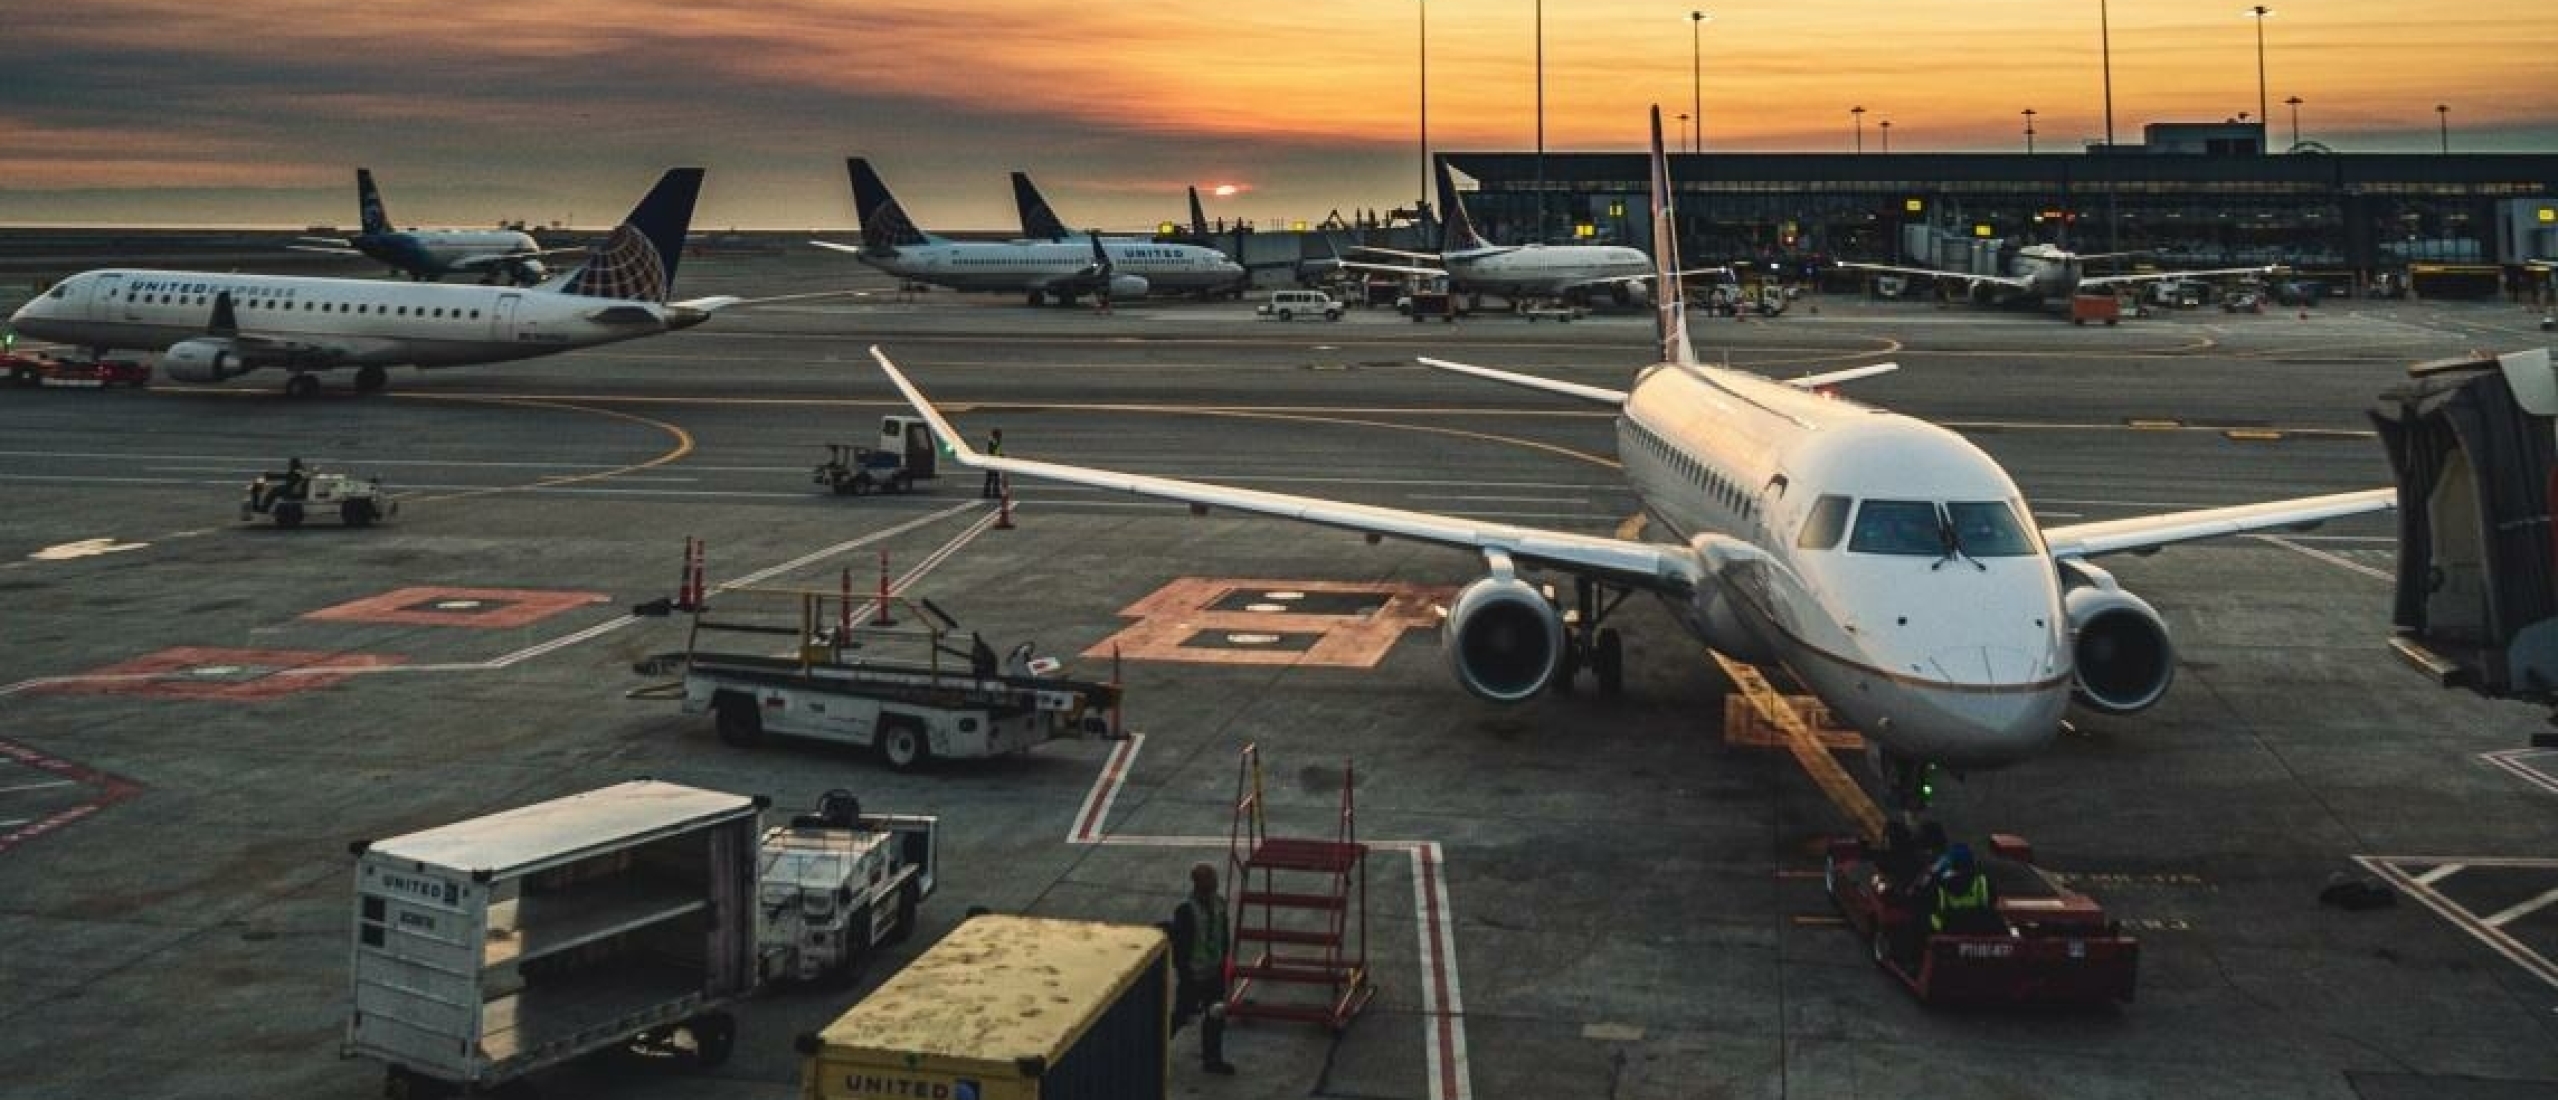 4 Tips on Getting to The Airport Faster